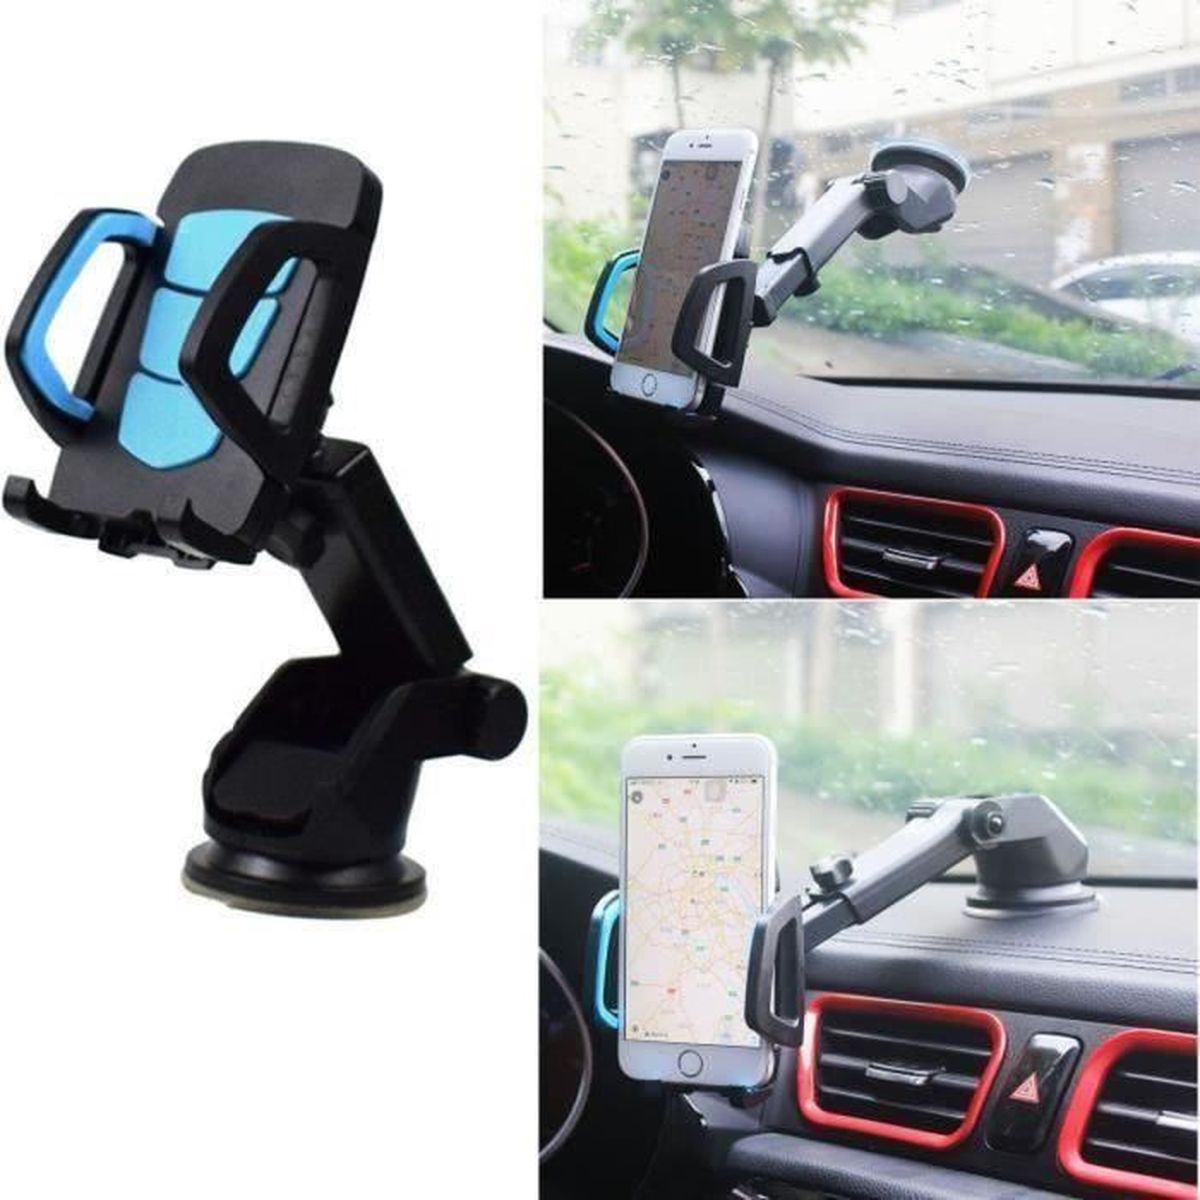 SUPPORT VOITURE UNIVERSEL POUR IPHONE SAMSUNG GALAXY LUMIA XPERIA HTC LG GPS 